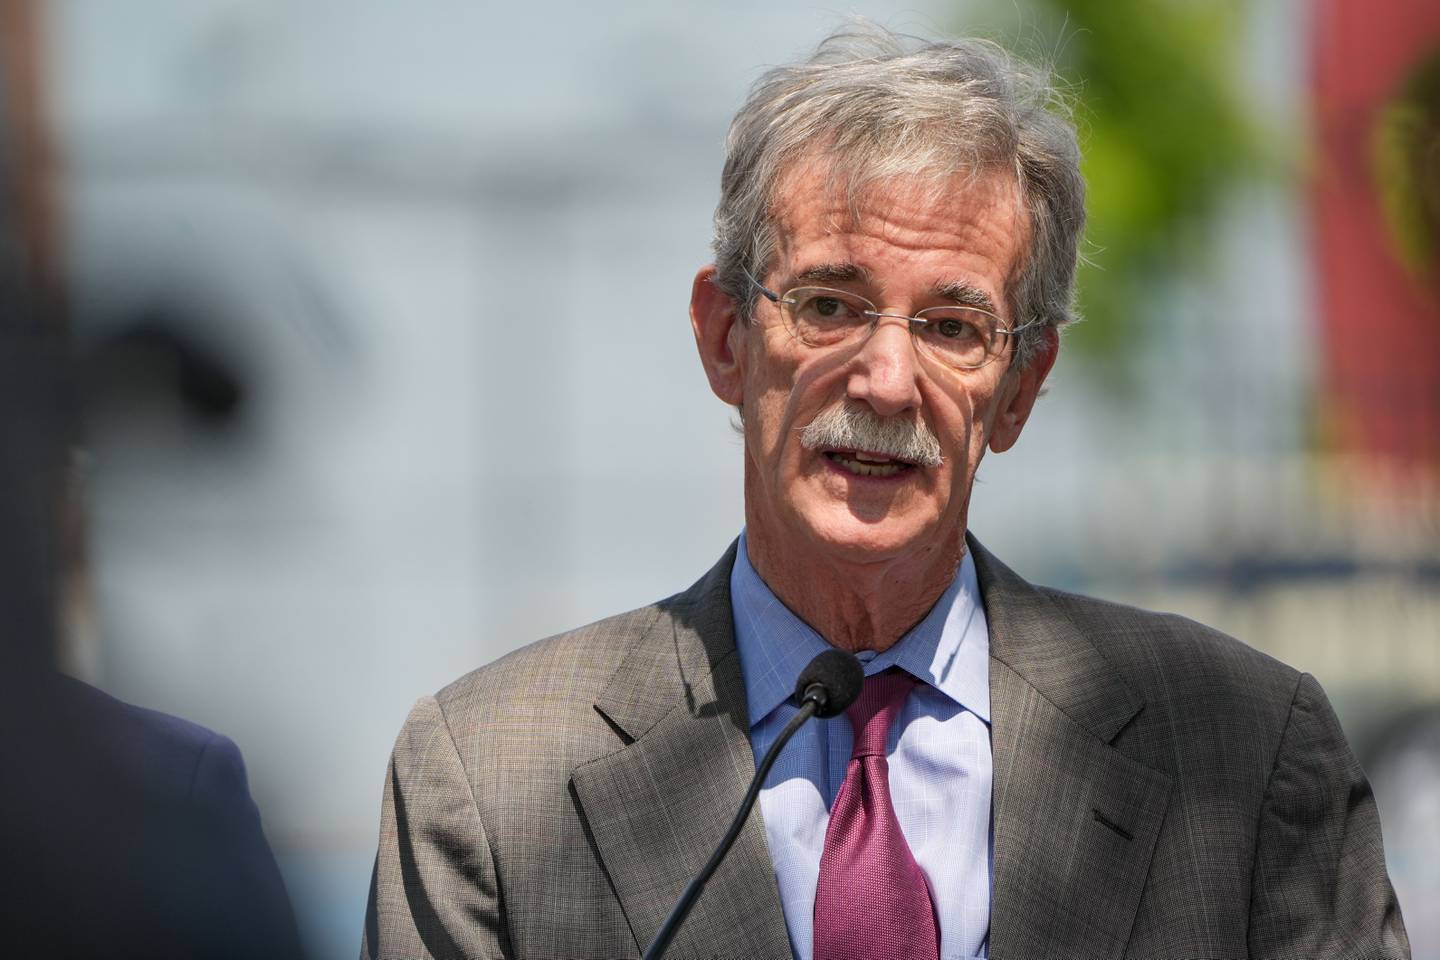 Maryland Attorney General Brian Frosh speaks at a press conference outside Tench Tilghman Elementary/Middle School to highlight resources and initiatives meant to reduce violent crime in Baltimore on 8/24/22.